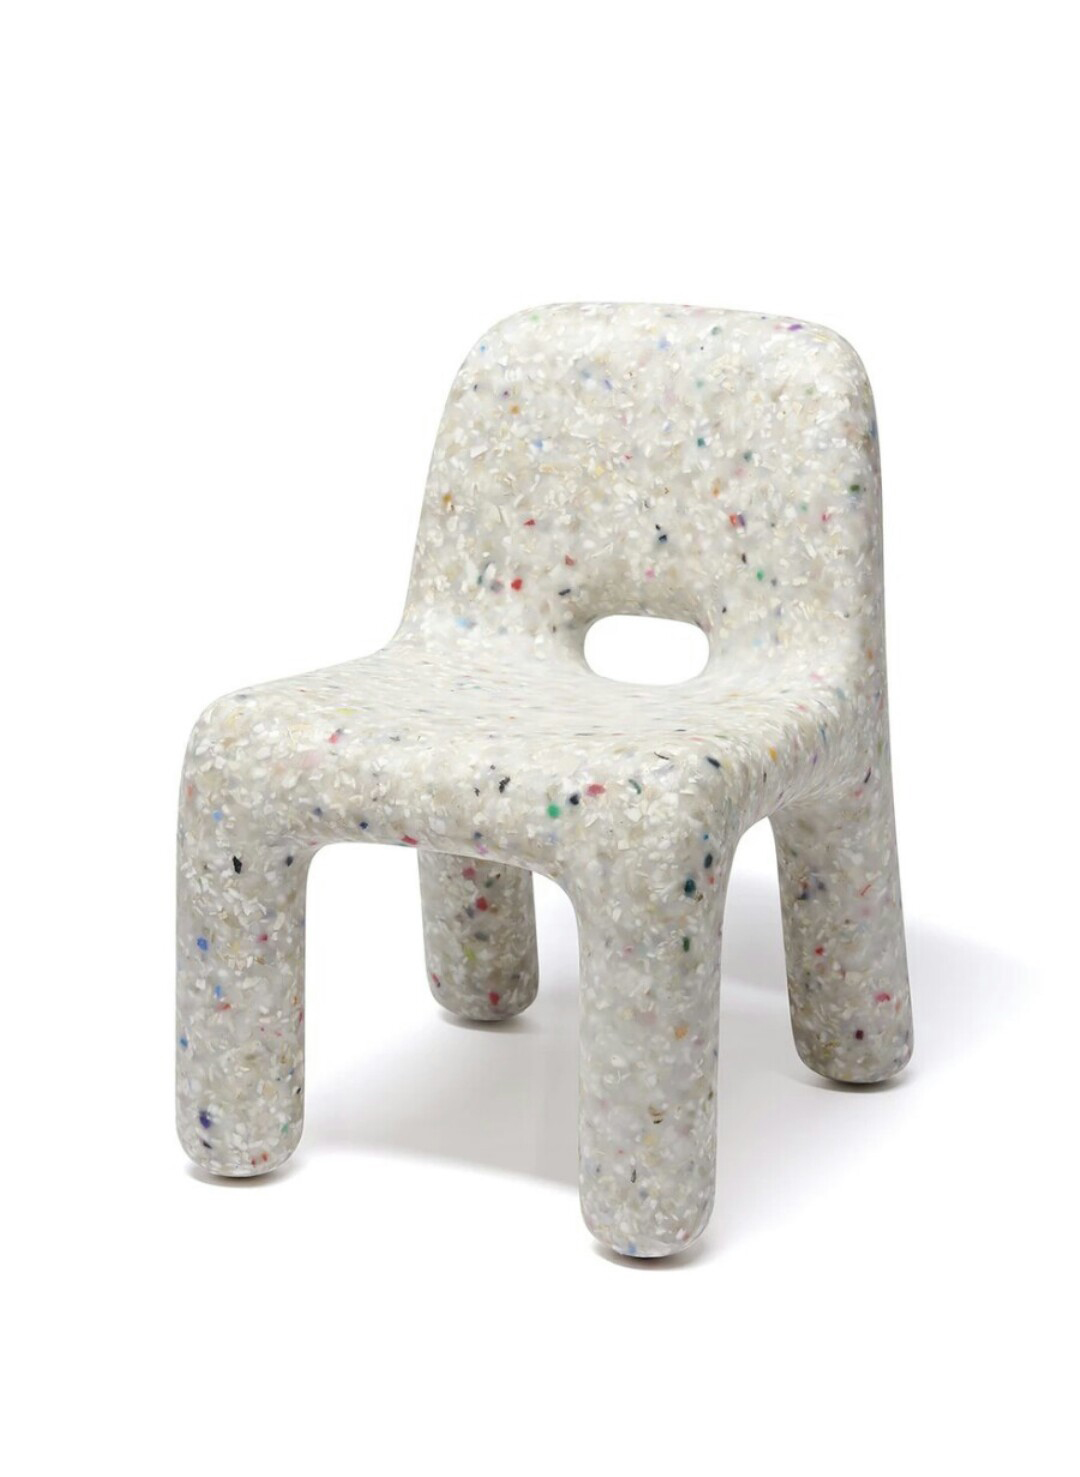 EcoBirdy Chair (colour: Off White)